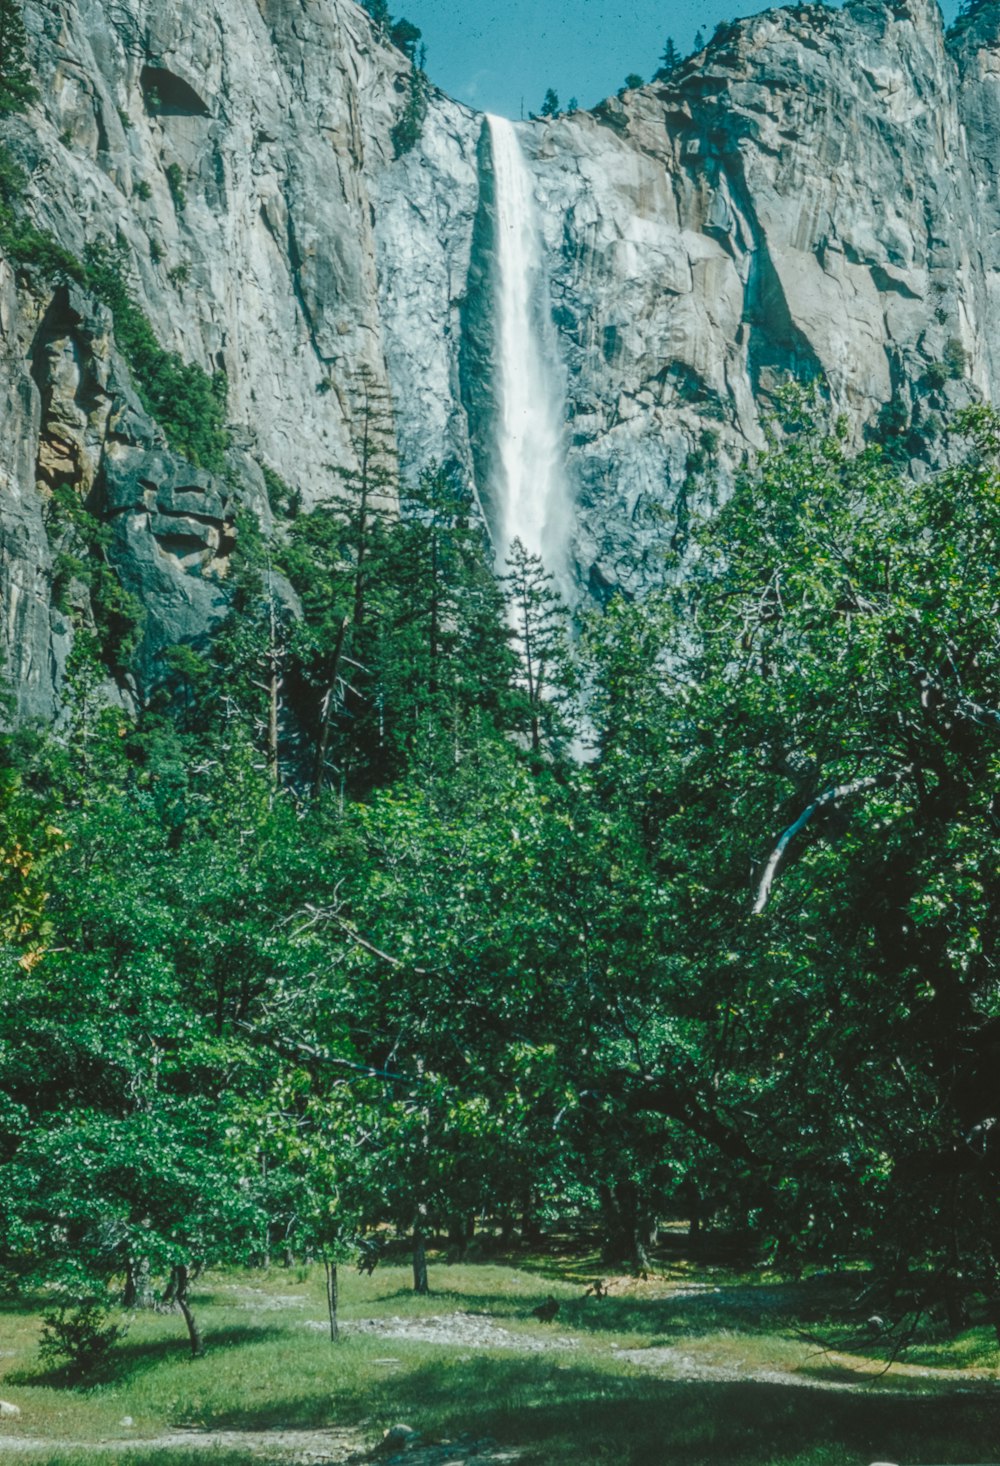 a view of a waterfall from the ground